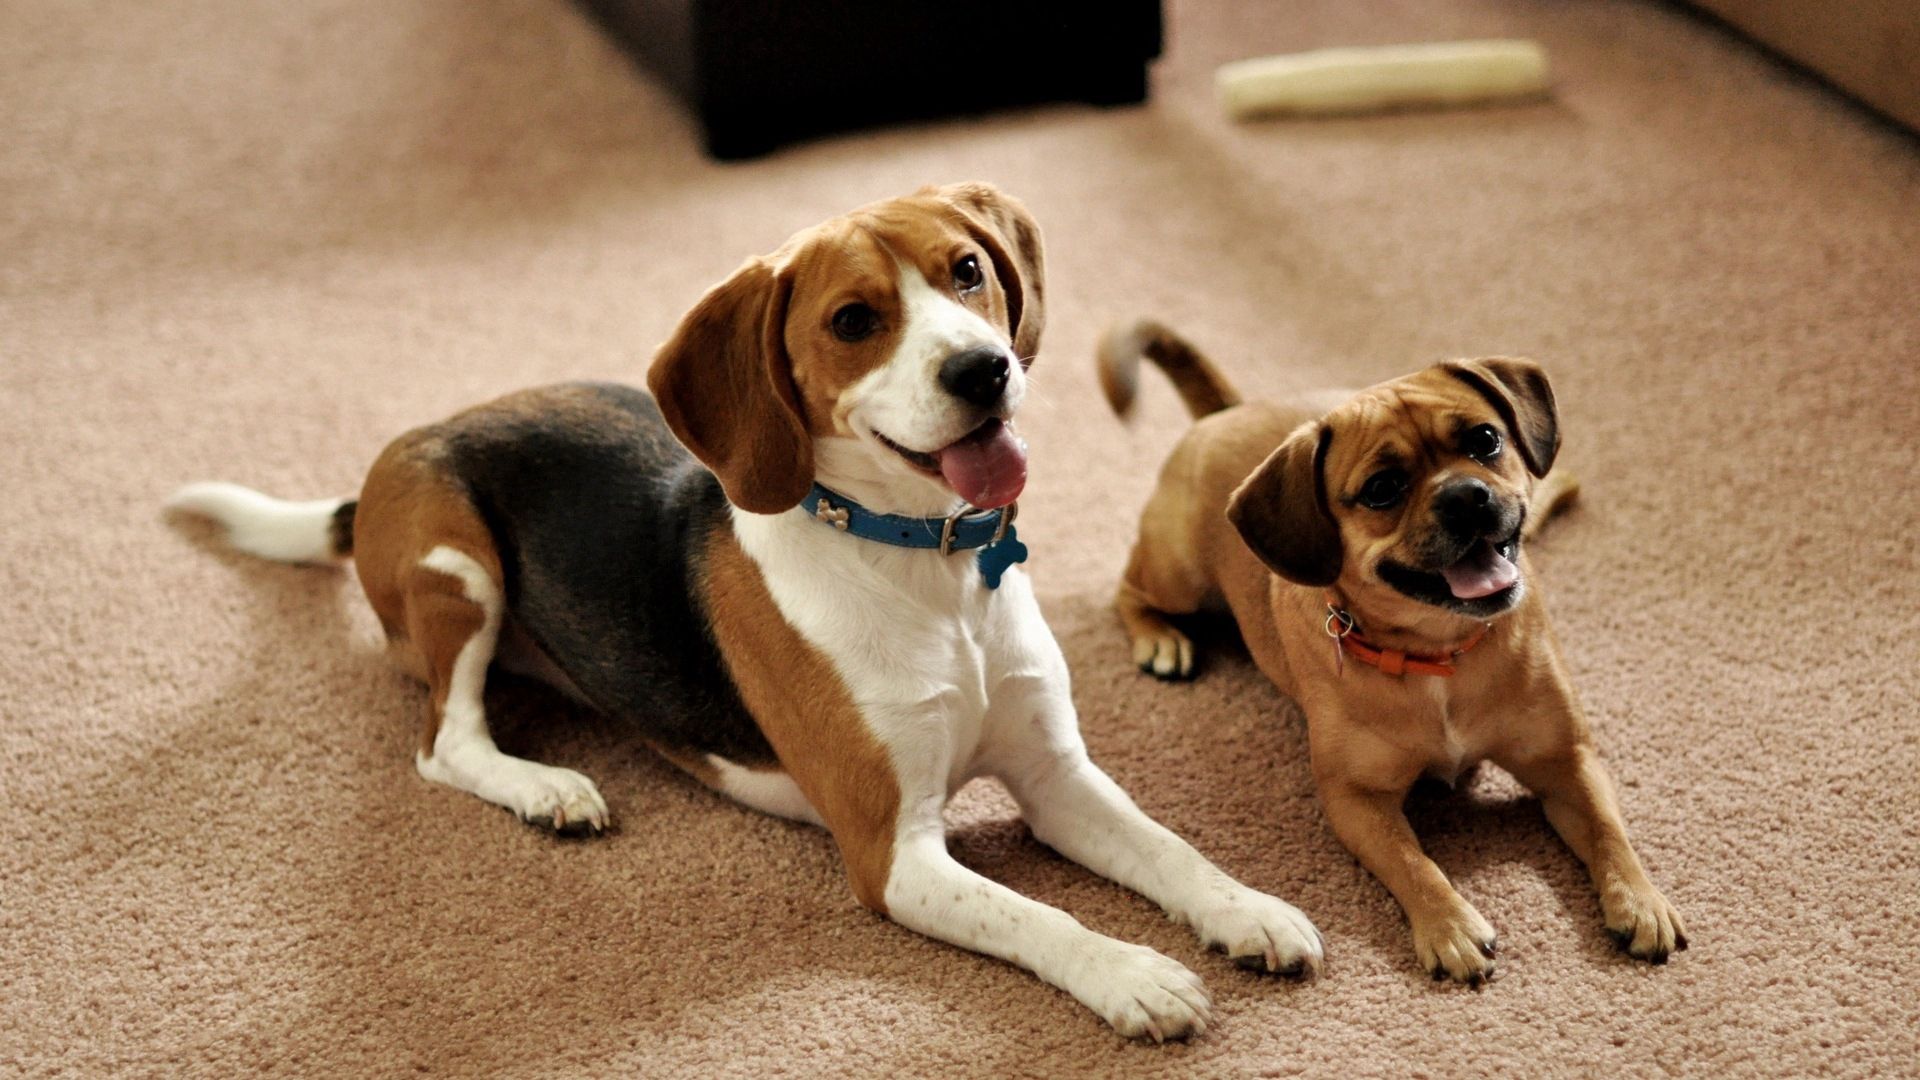 77804 Screensavers and Wallpapers Puppies for phone. Download animals, dogs, sit, couple, pair, puppies, expectation, waiting, beagle pictures for free